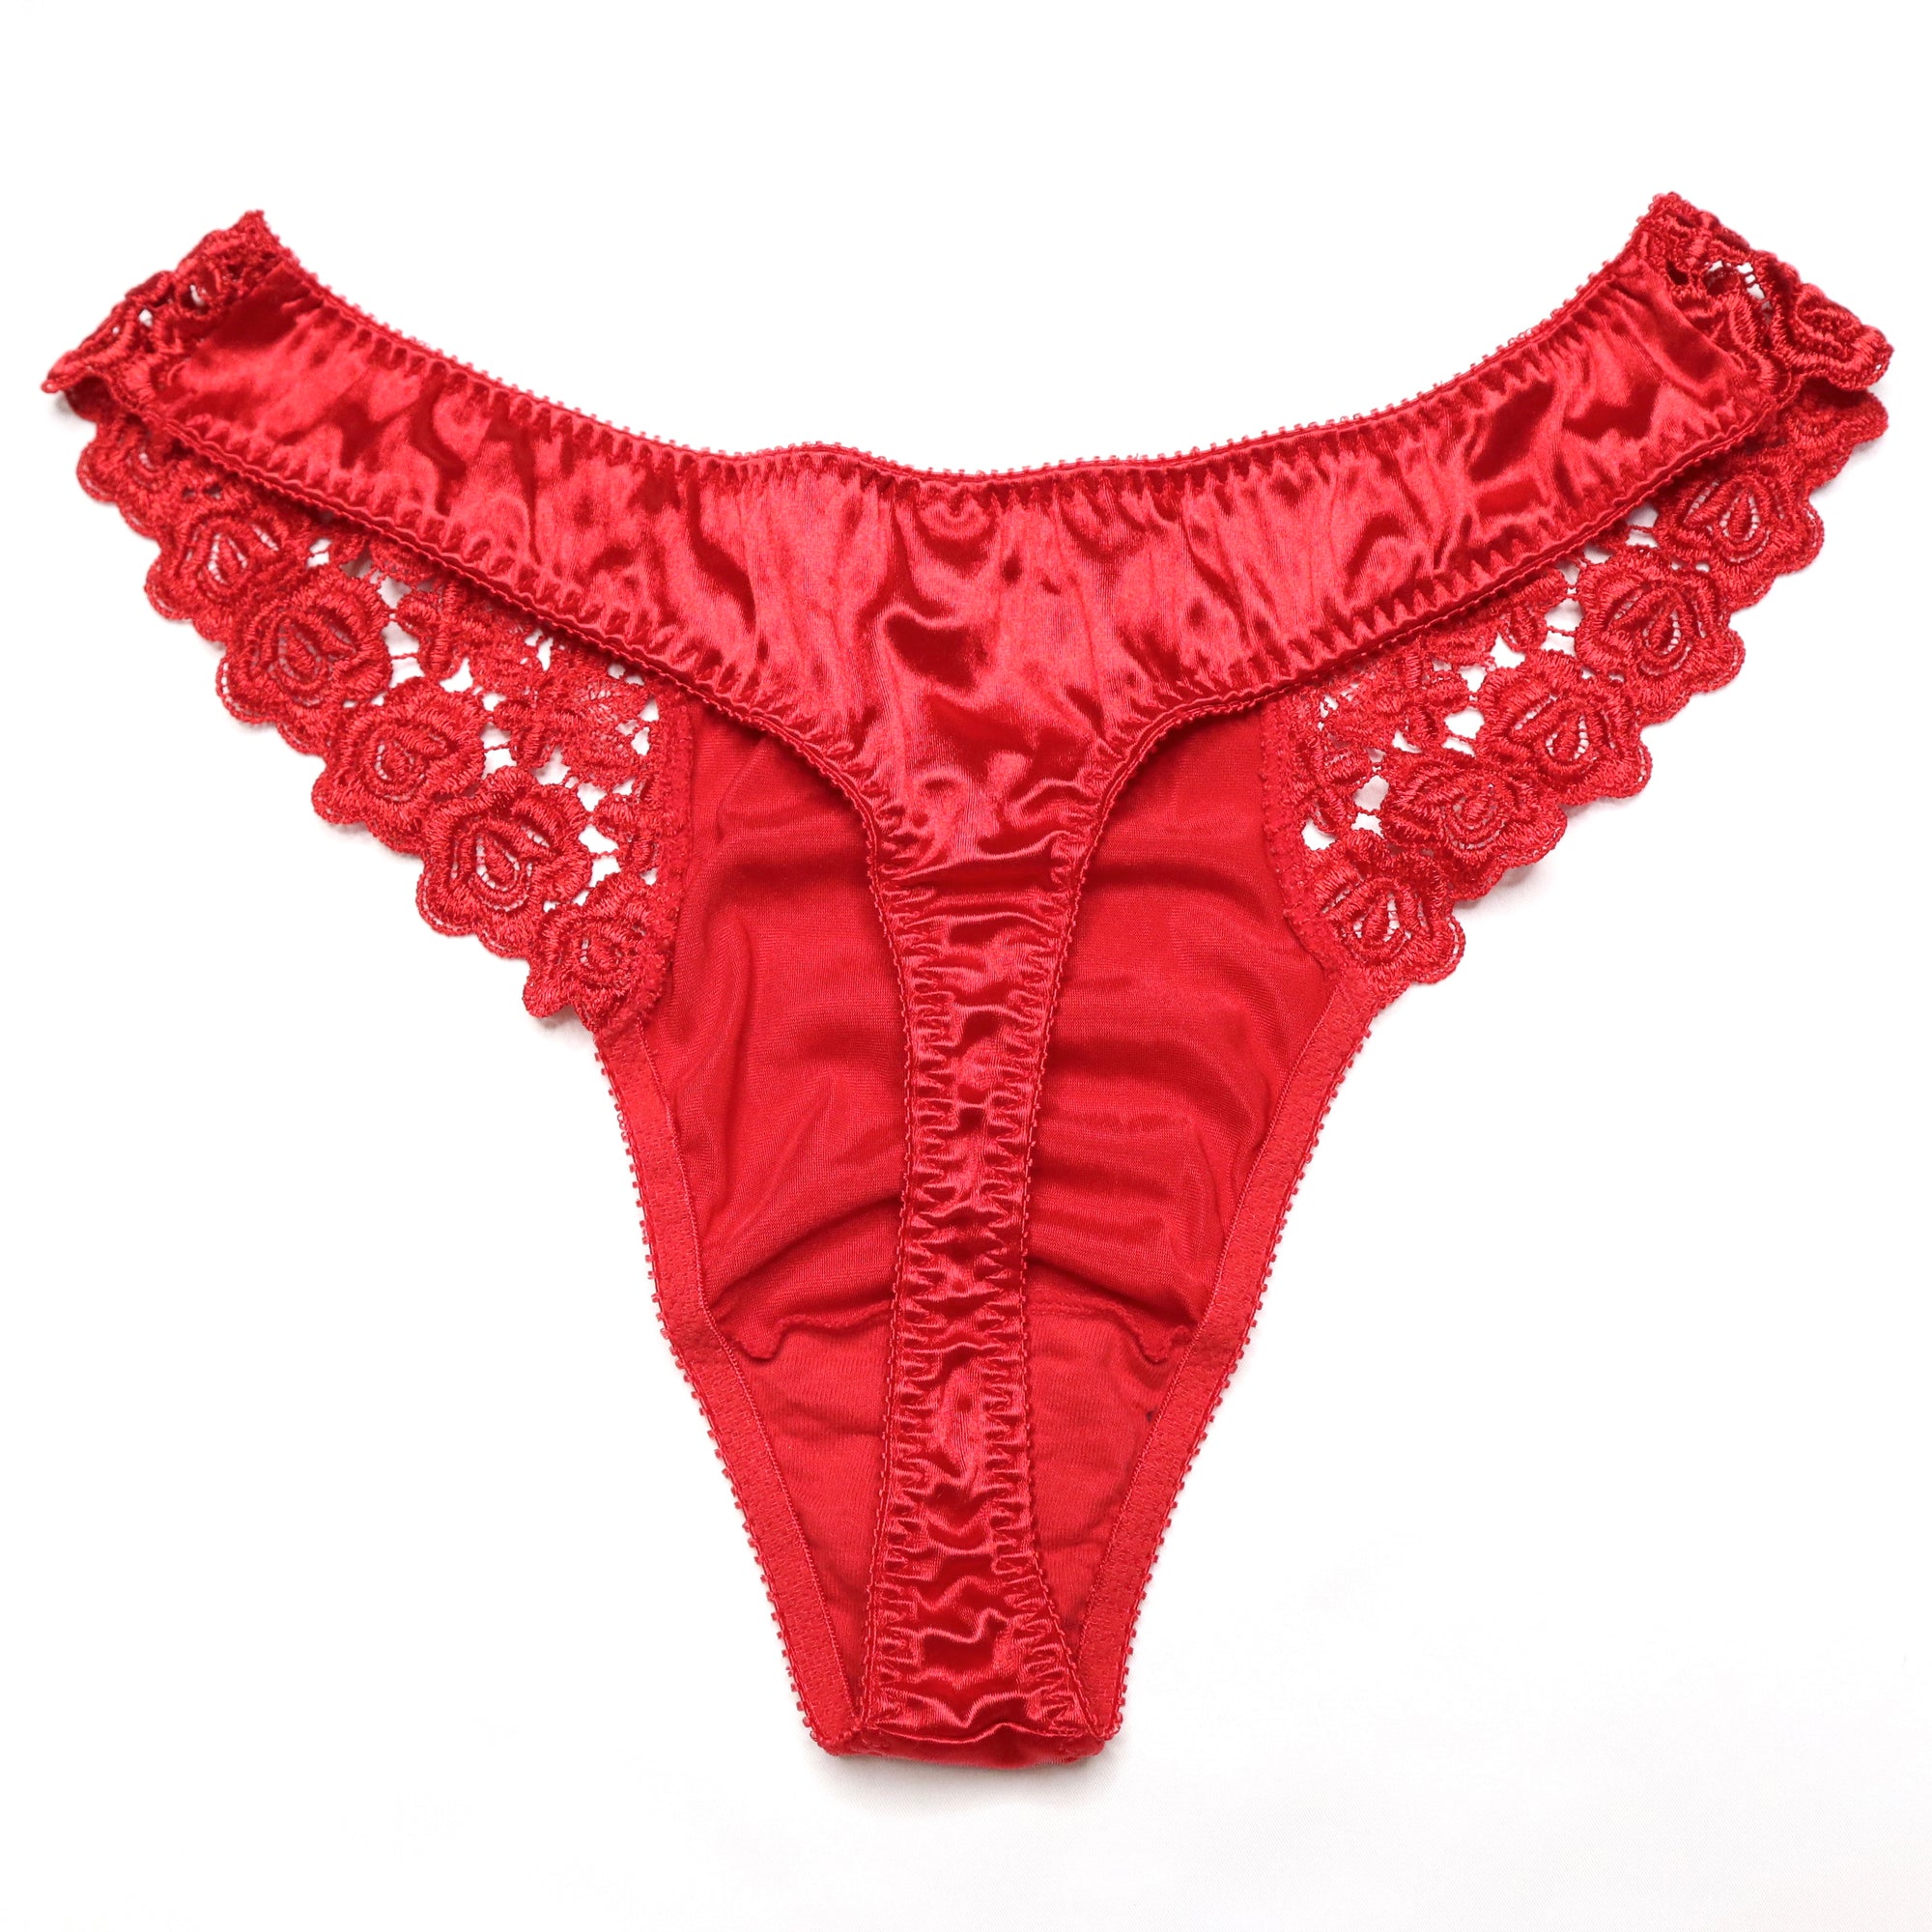 Vintage French Cut RED Lacey Stripe Thong Panty Size L